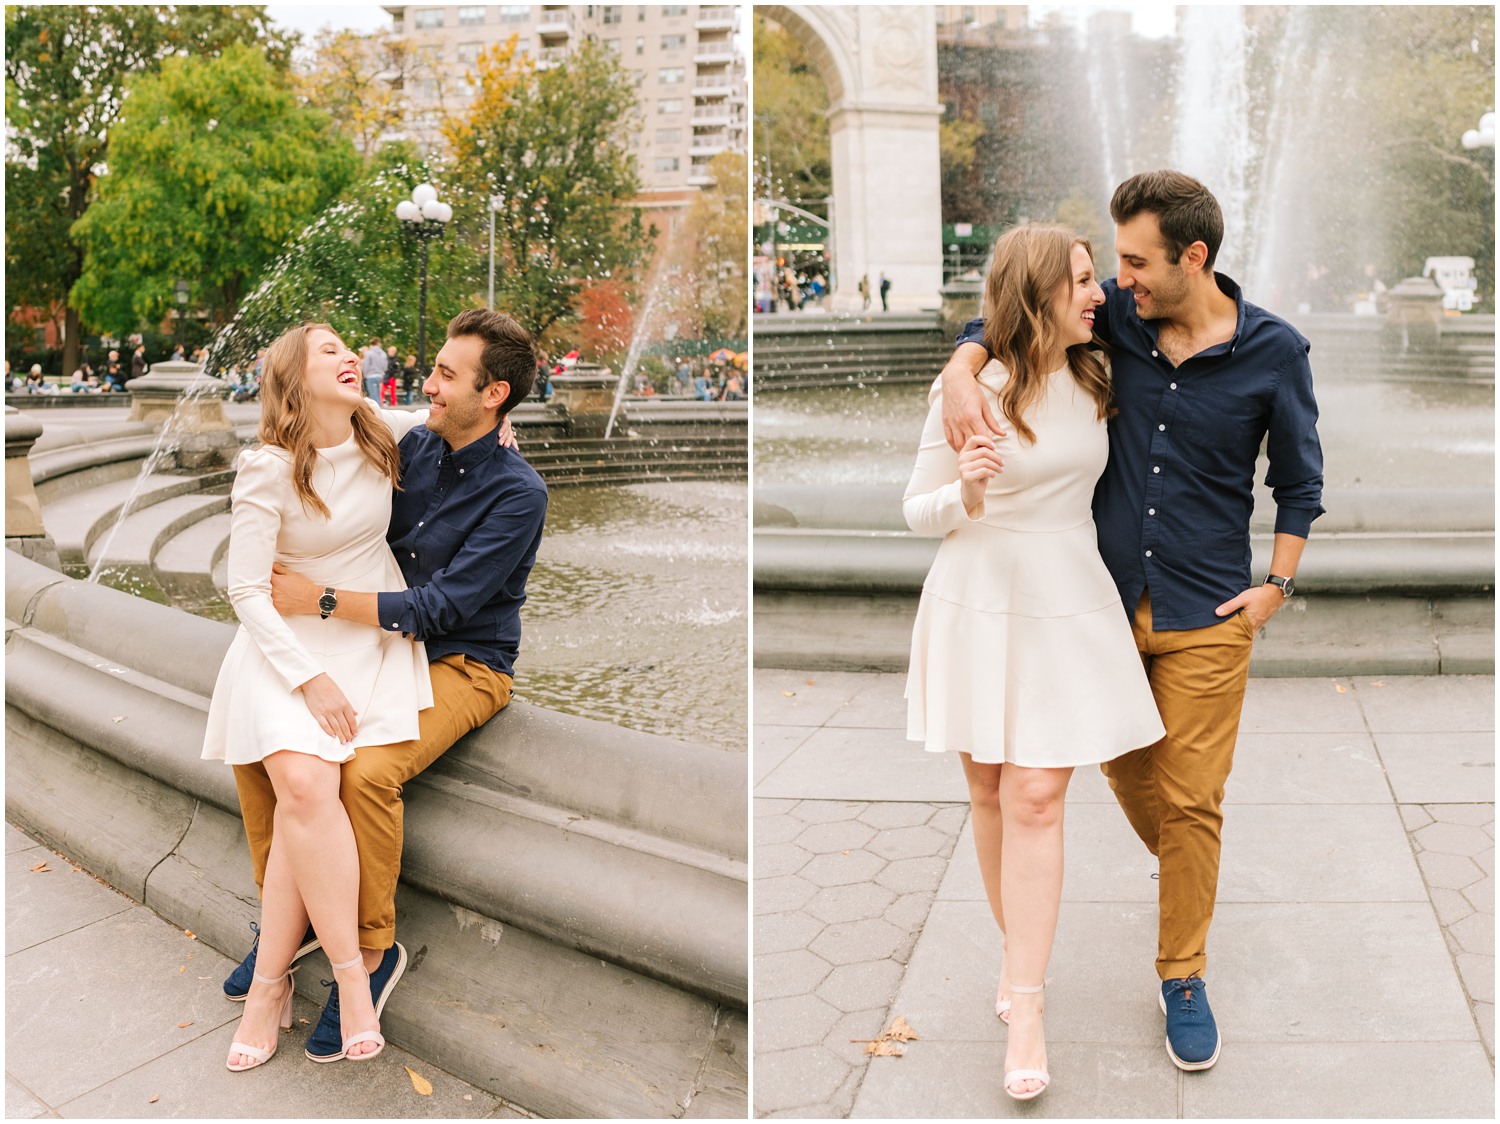 romantic New York City engagement session by Washington Park fountain